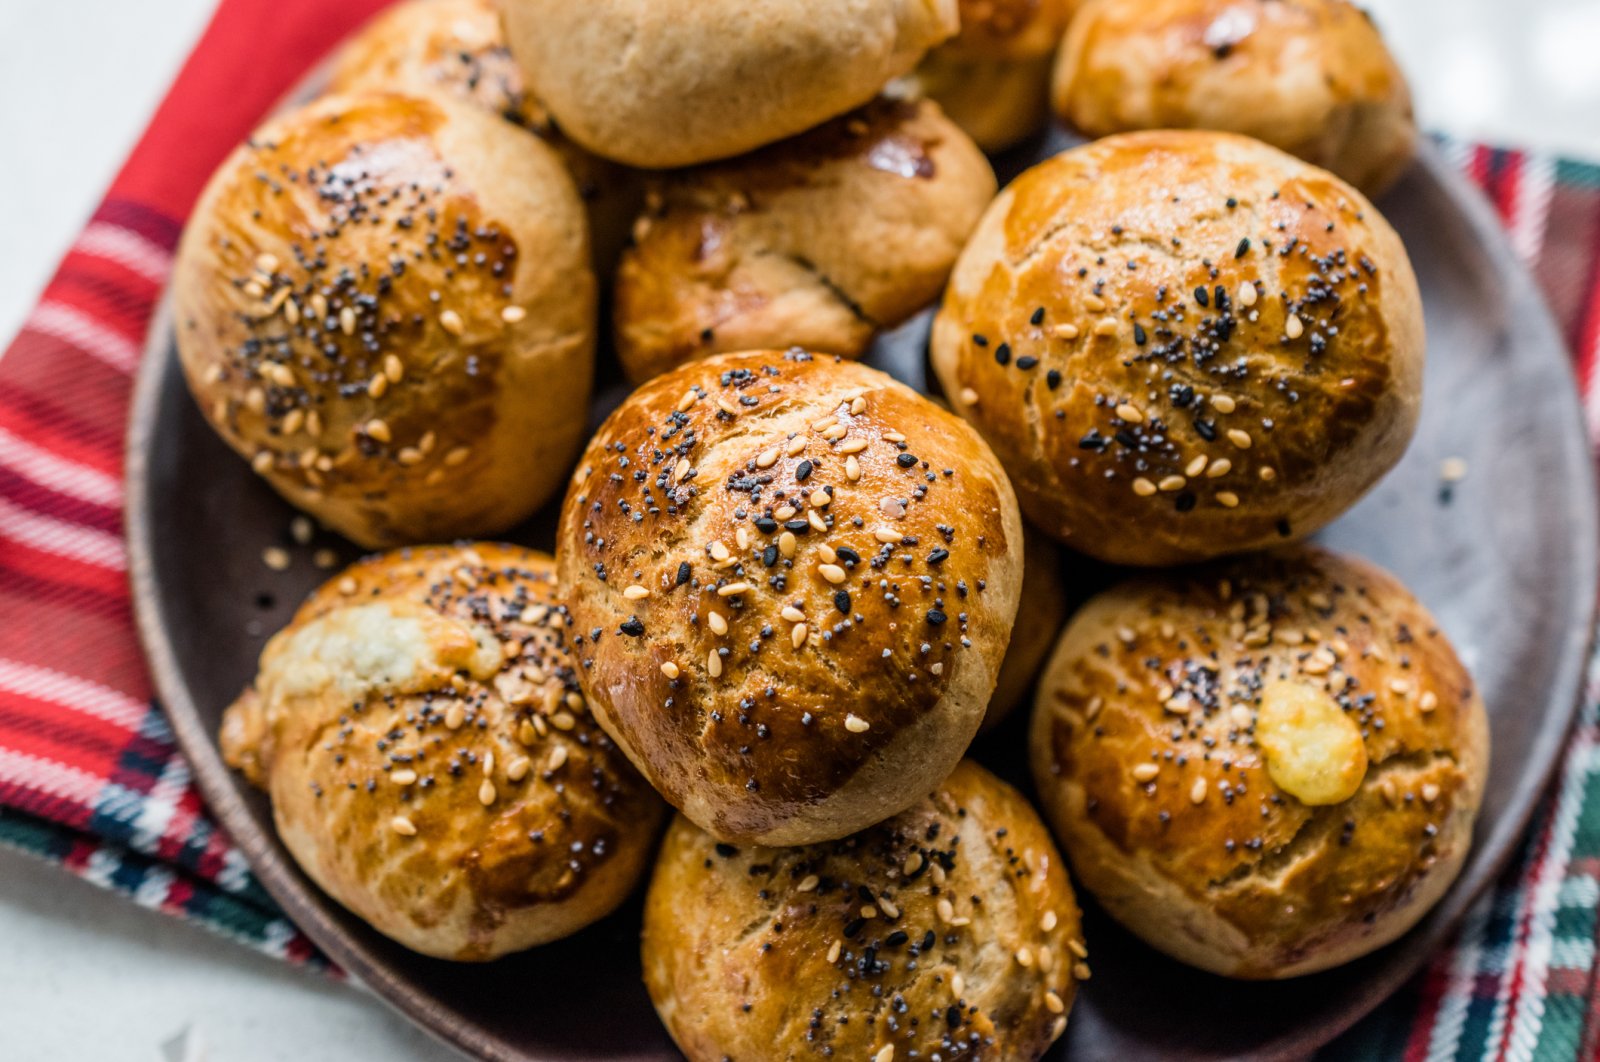 Poğaças are small traditional savory pastries usually eaten for breakfast.